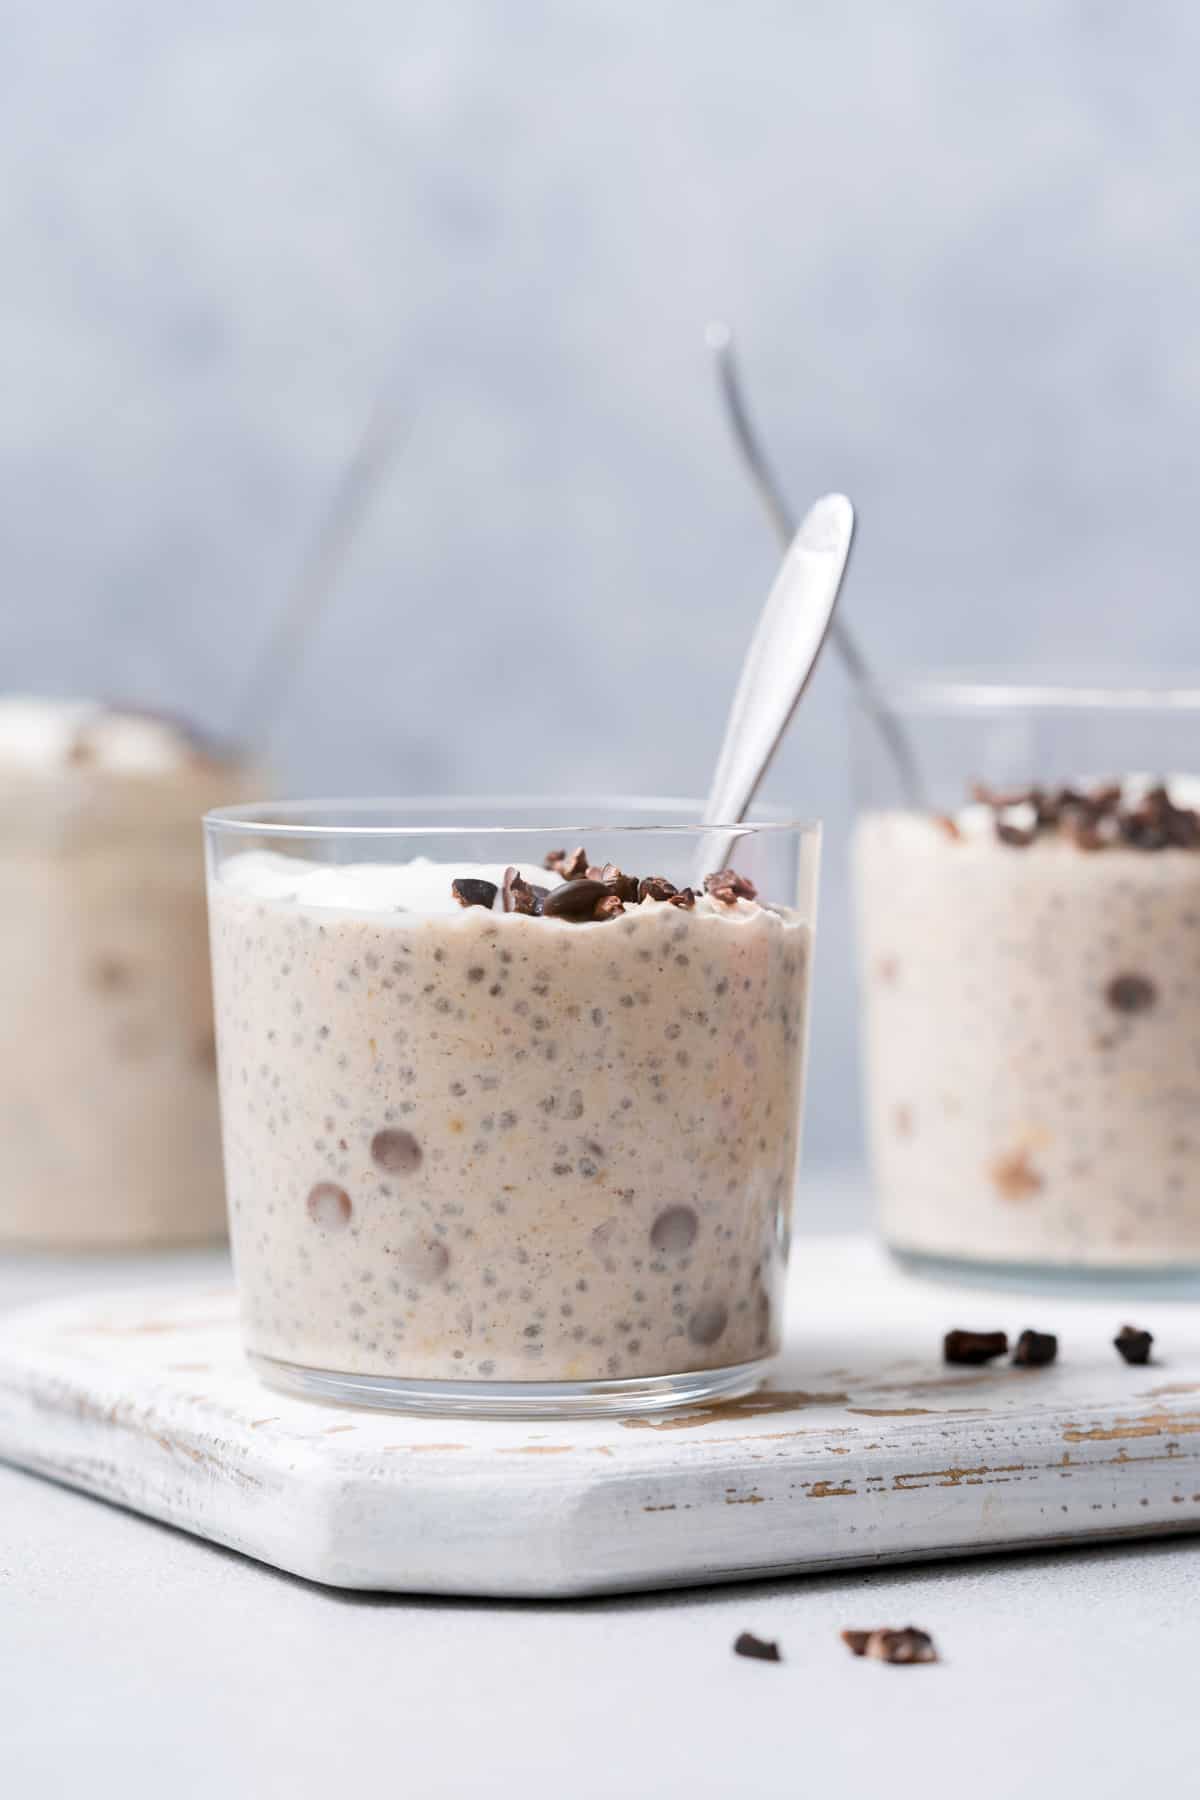 A jar of cookie dough overnight oats with a spoon inside.